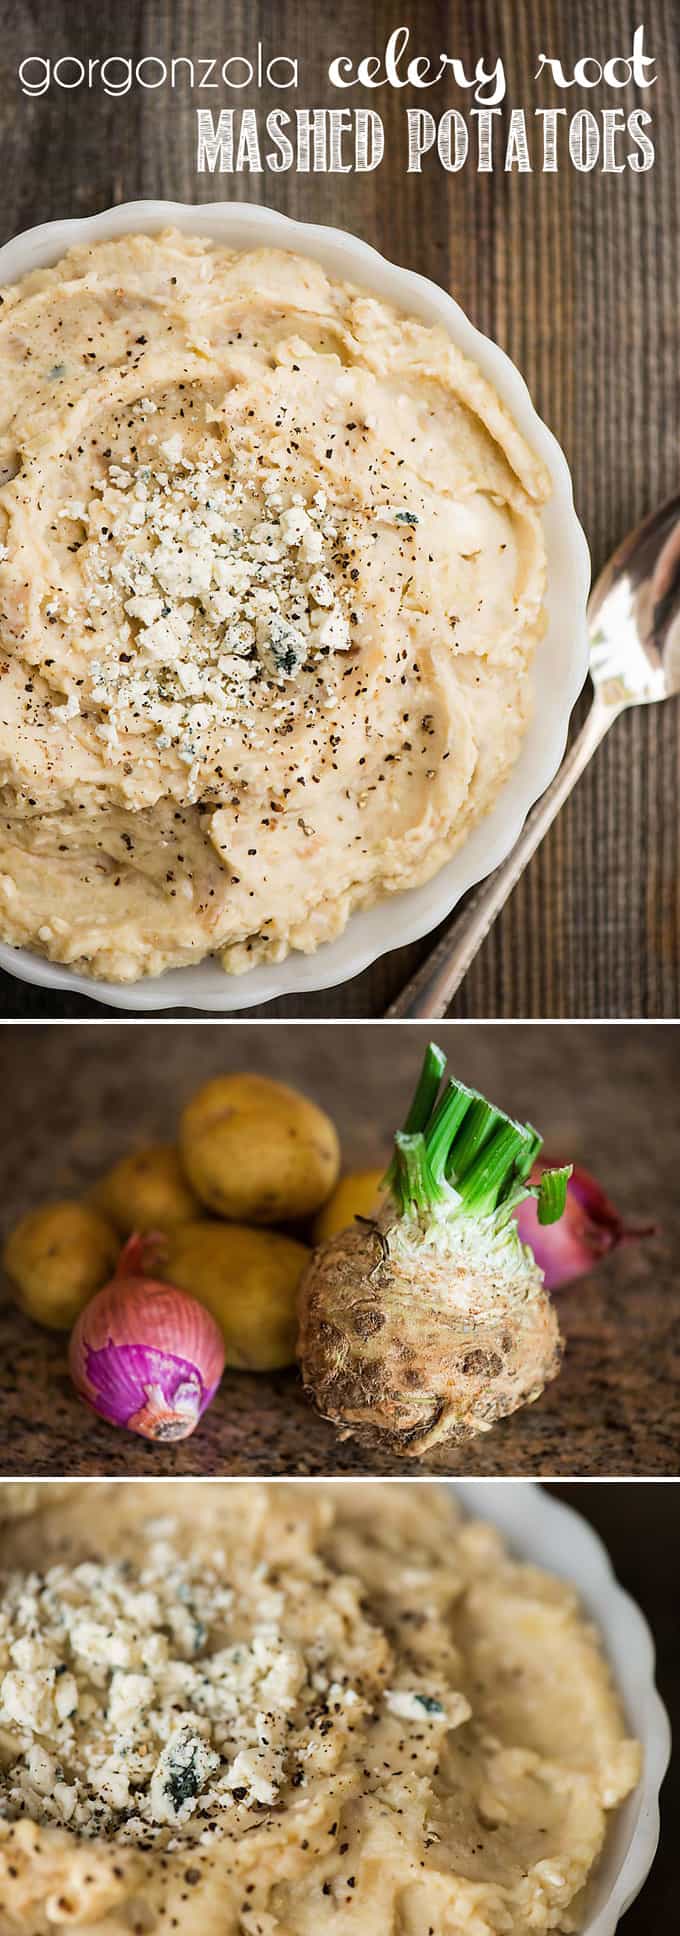 Gorgonzola Celery Root Mashed Potatoes are the creamiest, most flavorful side dish recipe I\'ve ever enjoyed! Perfect for Thanksgiving or a weekday dinner!